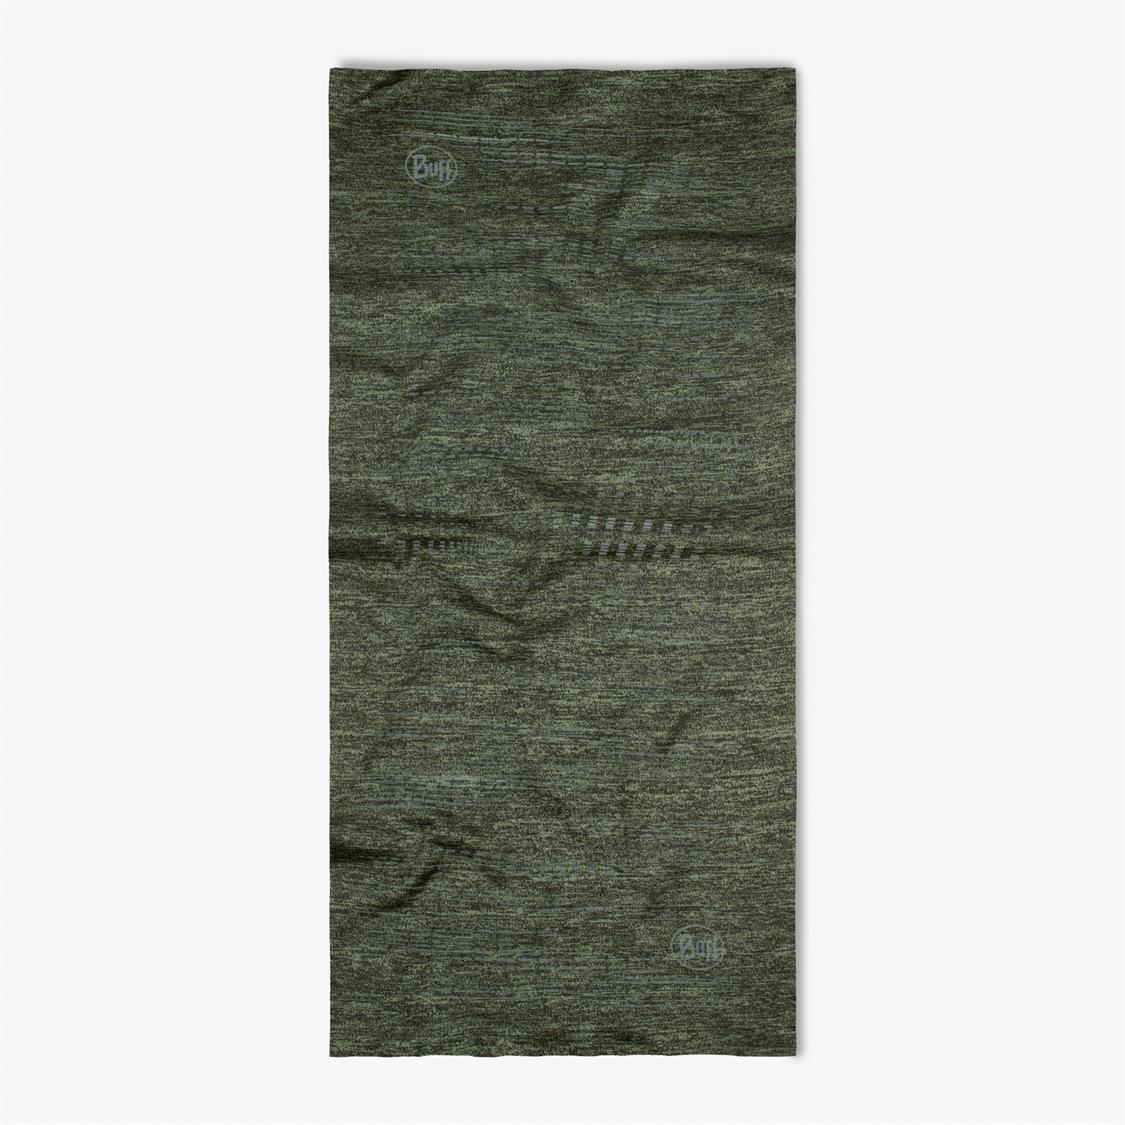 Dry Flx Camouflage -118096.866.10.00_2